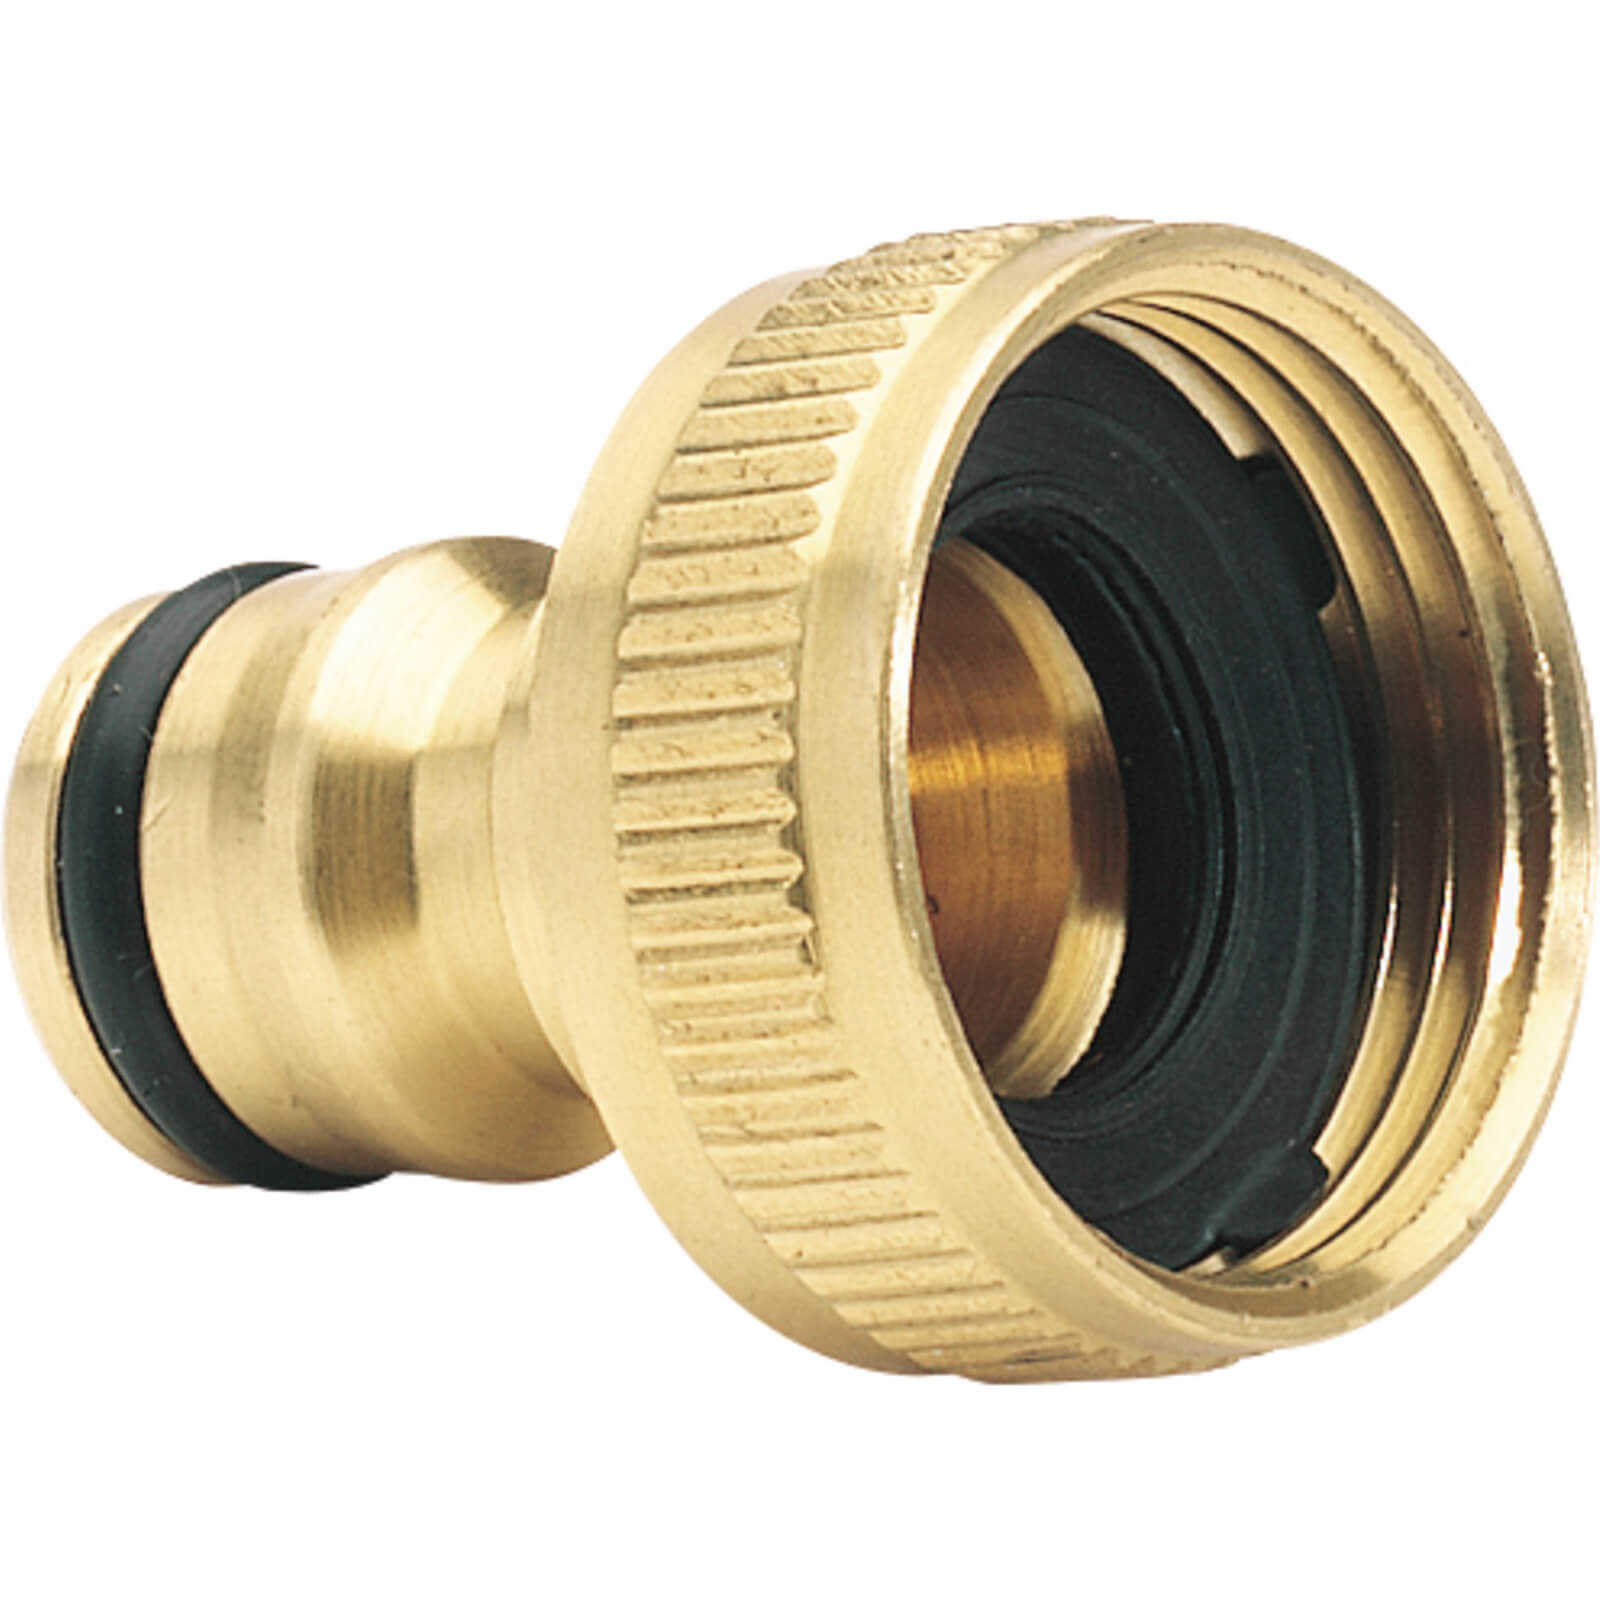 Photo of Draper Expert Brass Hose Pipe Tap Connector 3/4